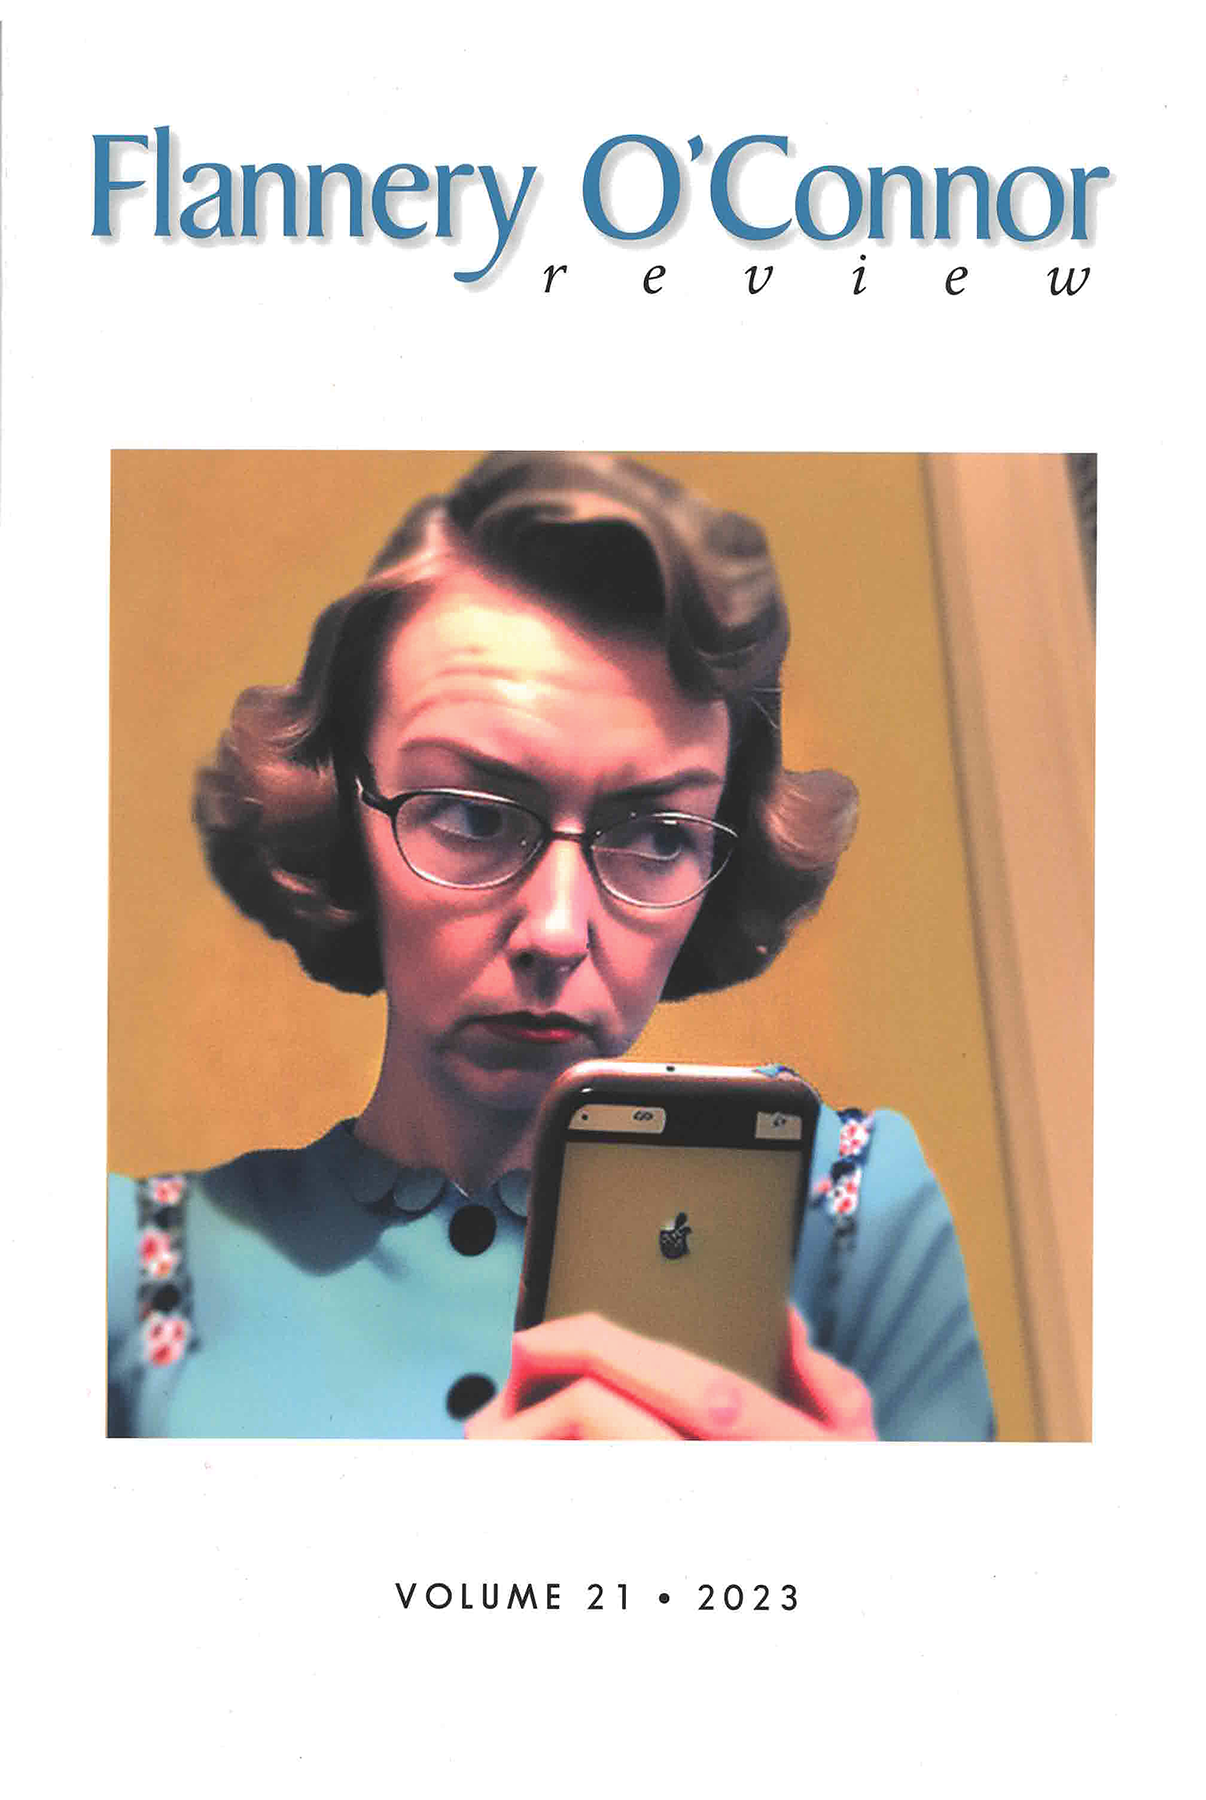 The 2023 edition of The Flannery O'Connor Review. Cover art: "The iLife You Save May Be Your Phone," AI art by Joseph F. Brown.